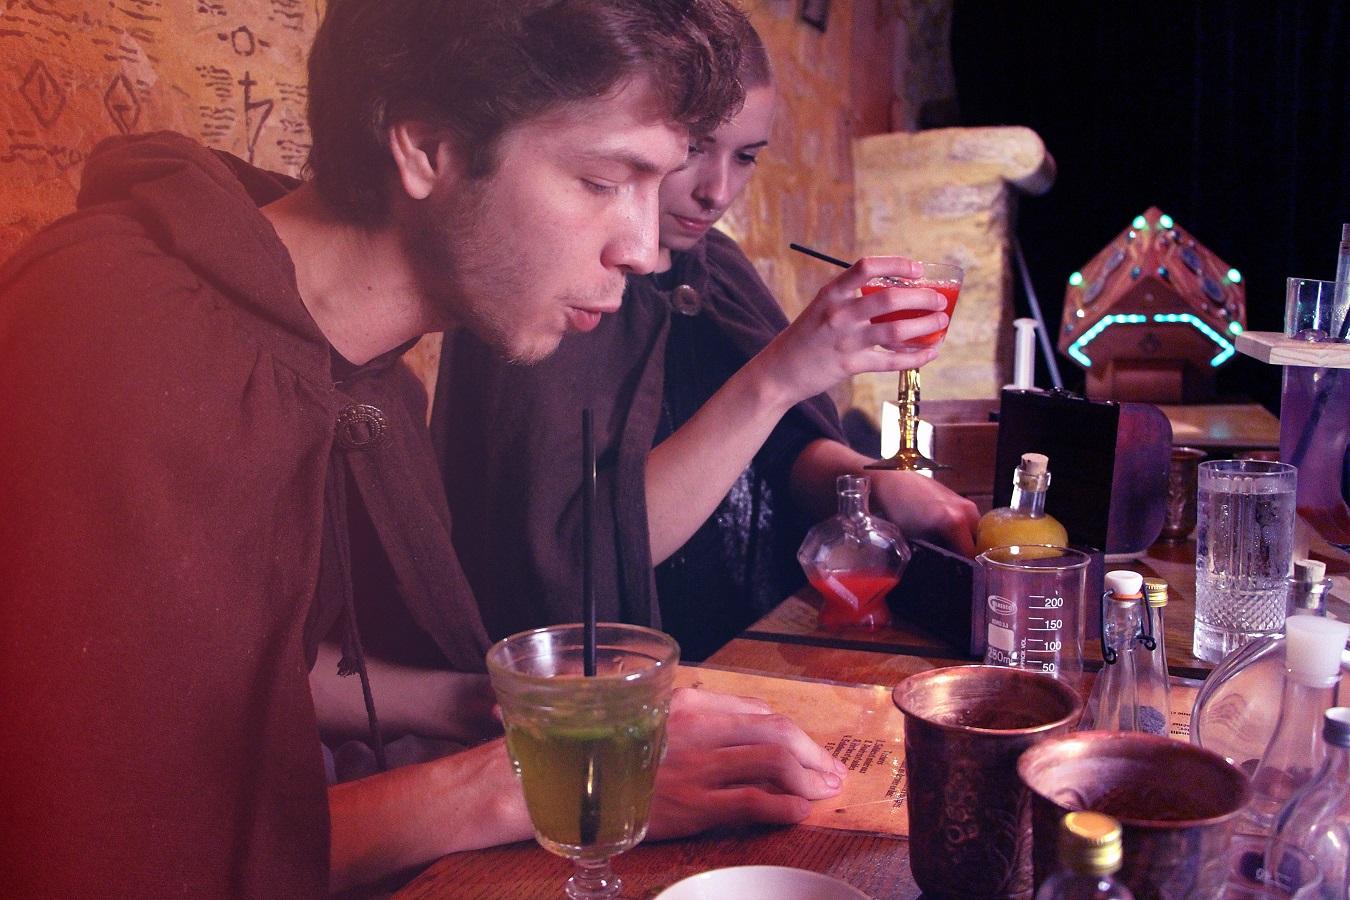 Potions & Co - Theatrical Escape Game creating cocktails